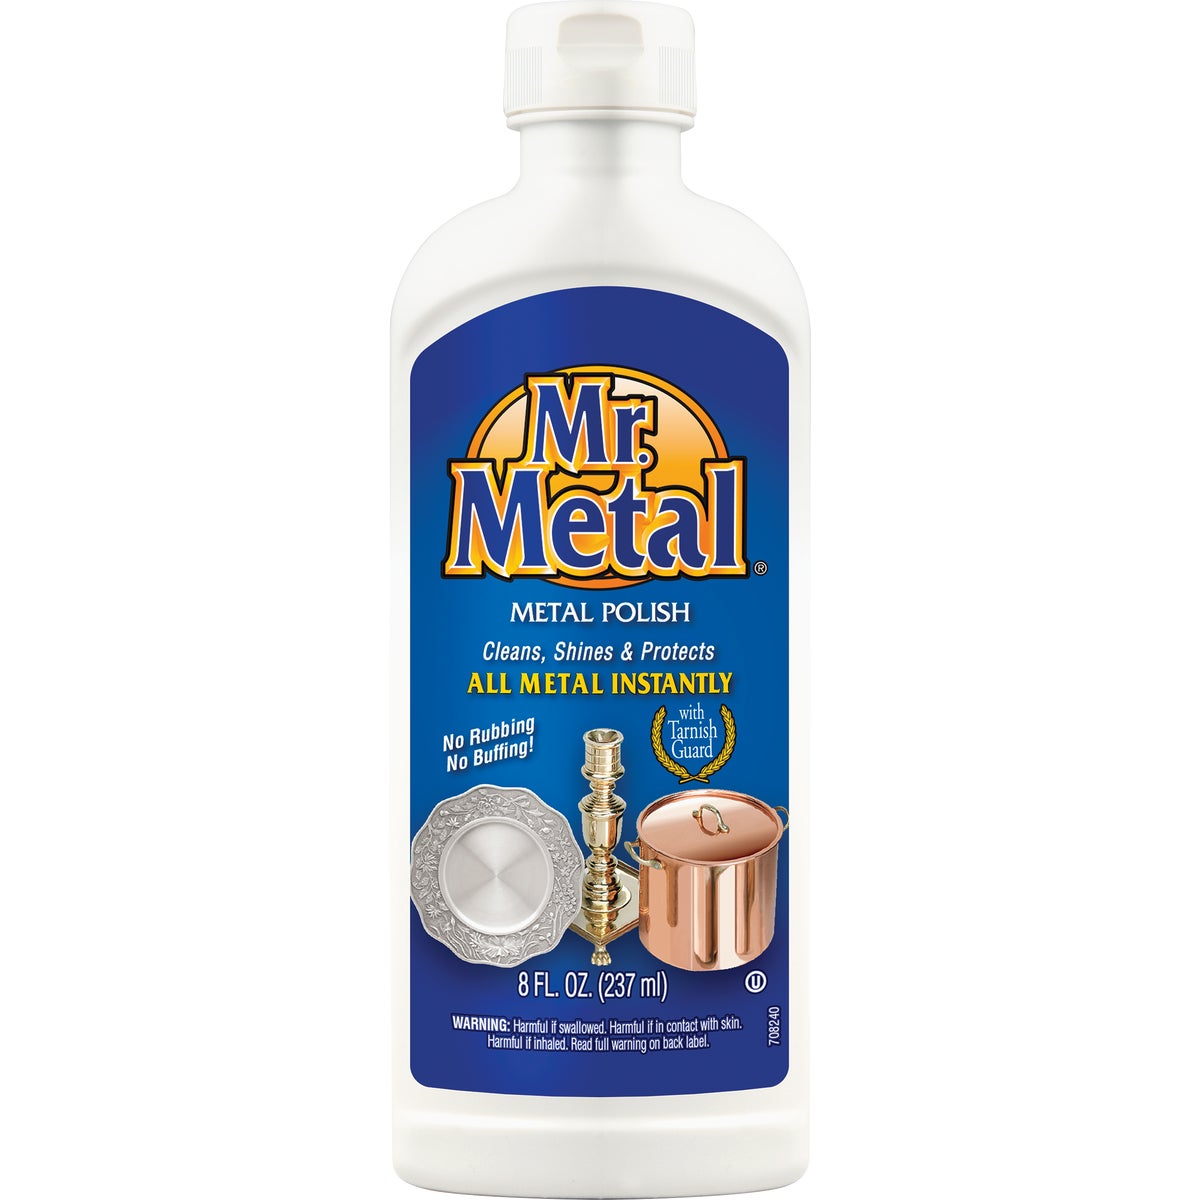 Item 600580, Cleans, shines, and protects all metals including silver, brass, copper, 